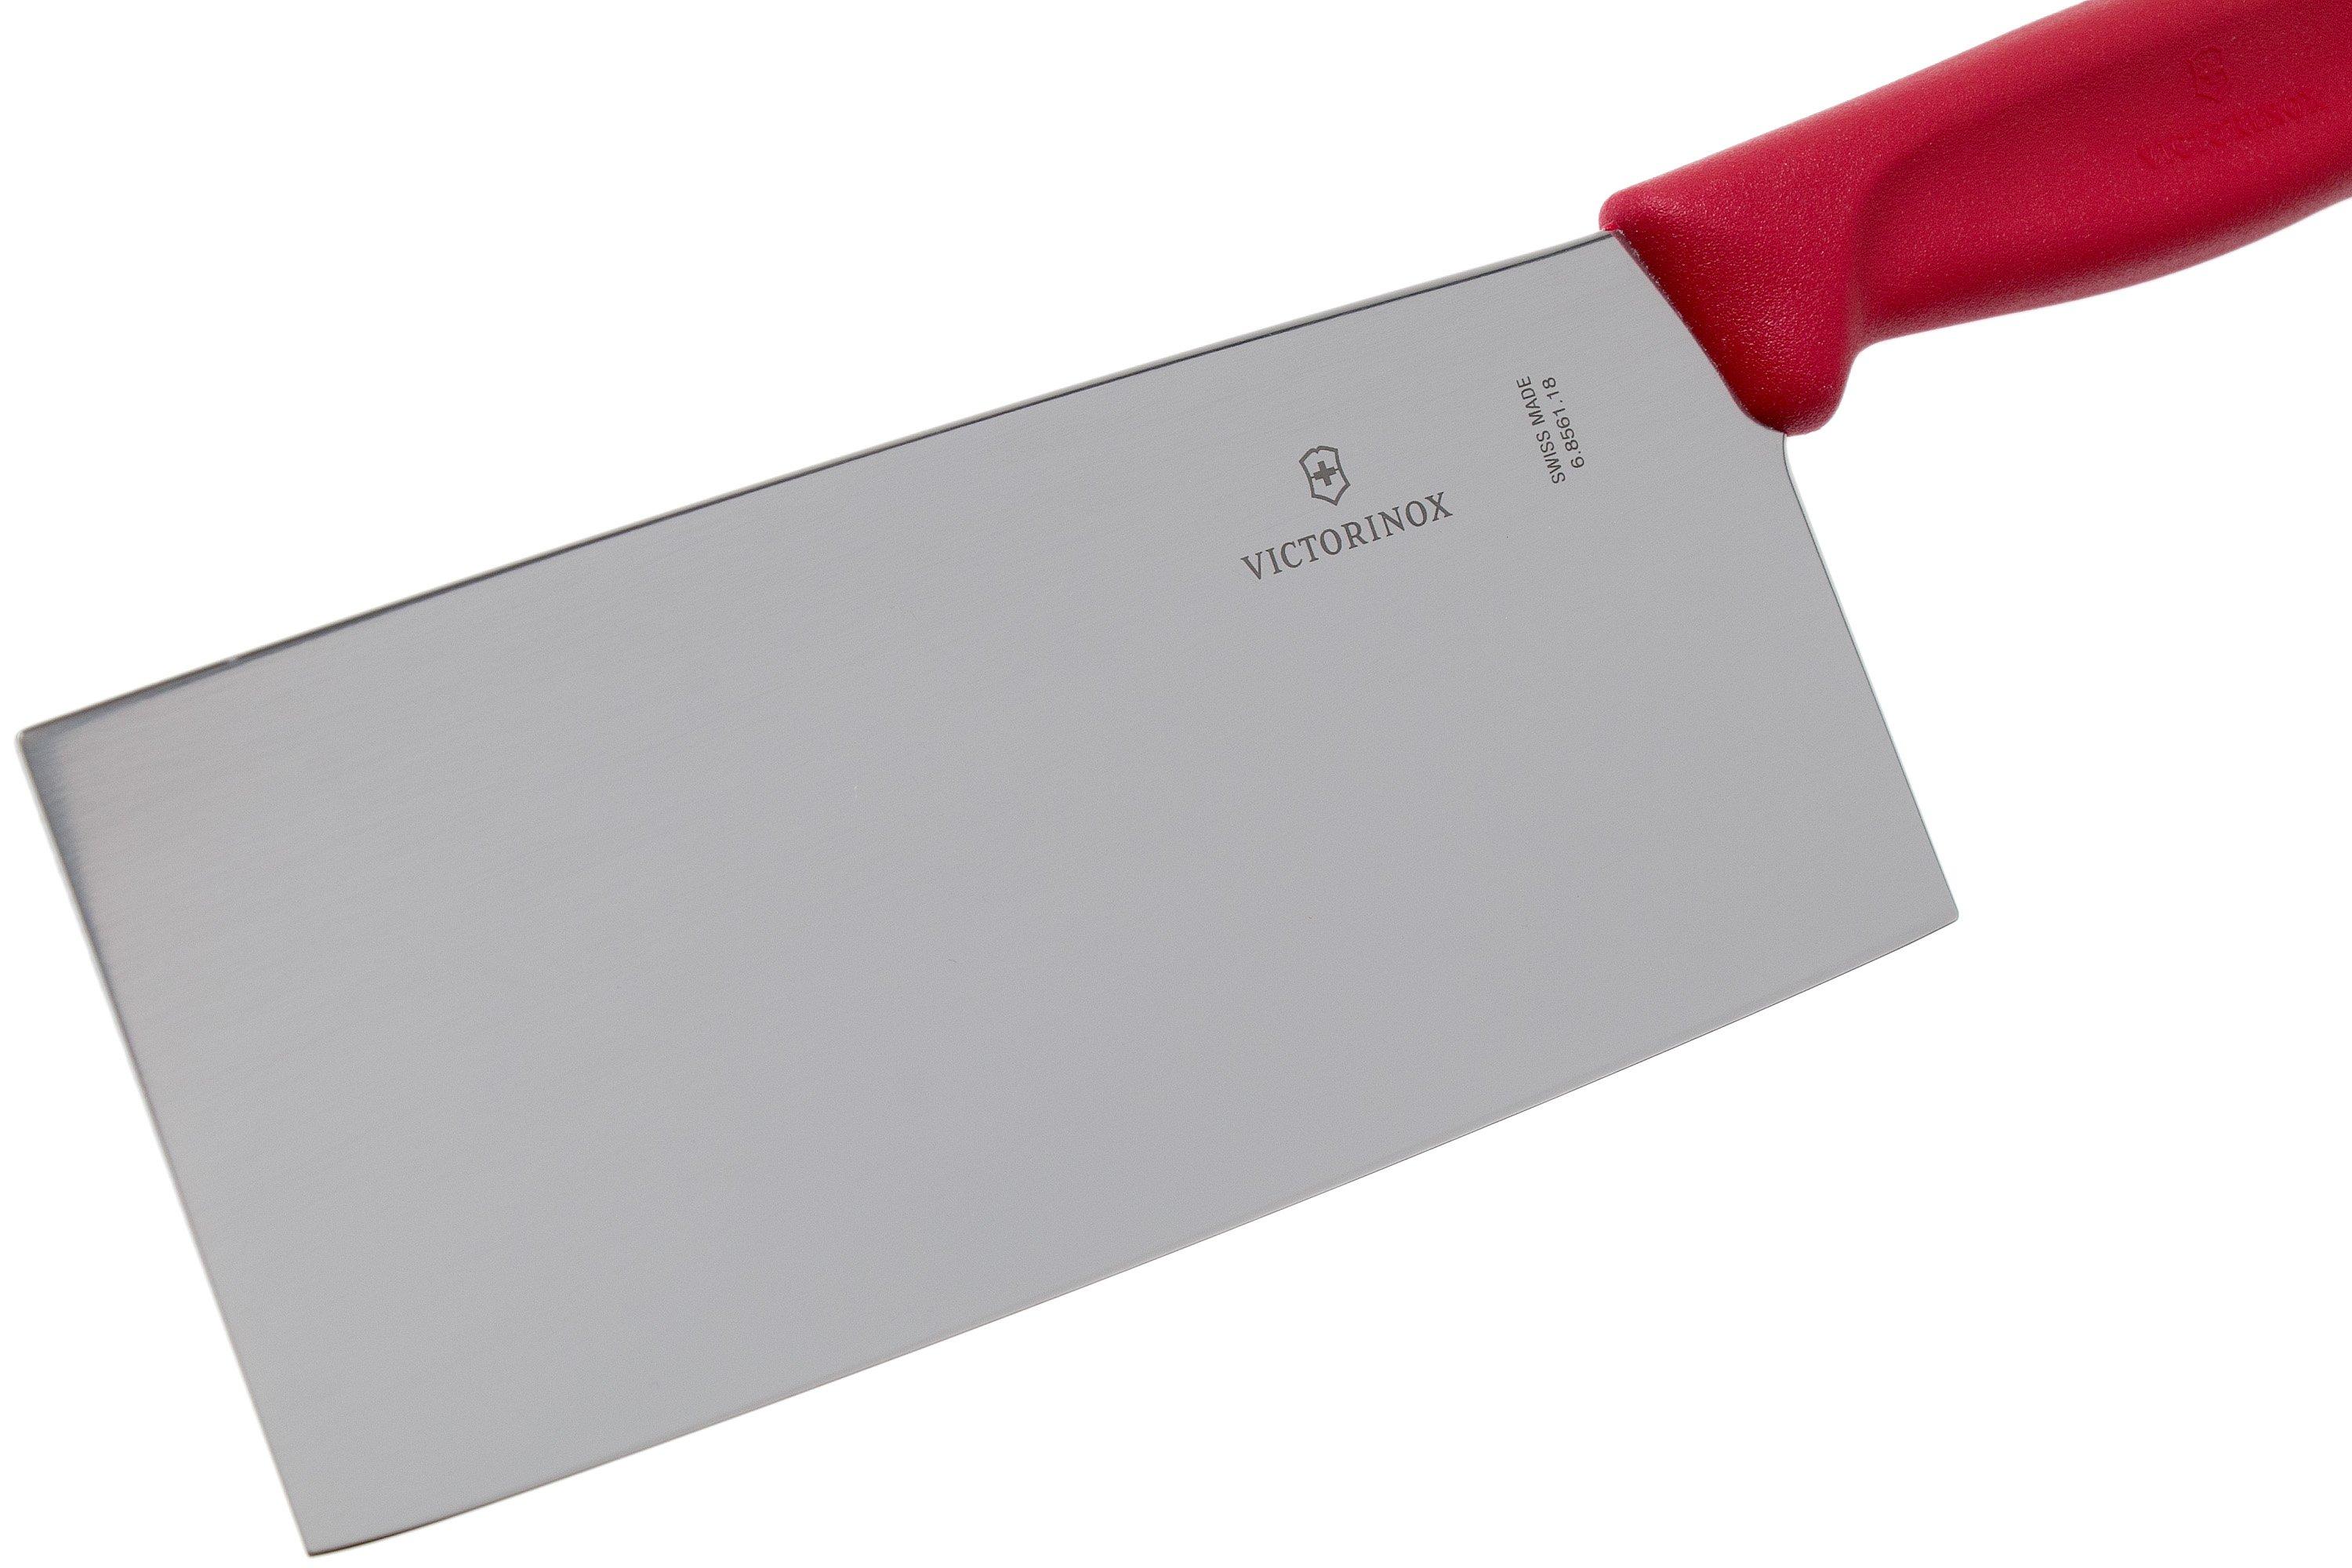 Victorinox Swiss Classic Chinese Style Chef's Knife in red